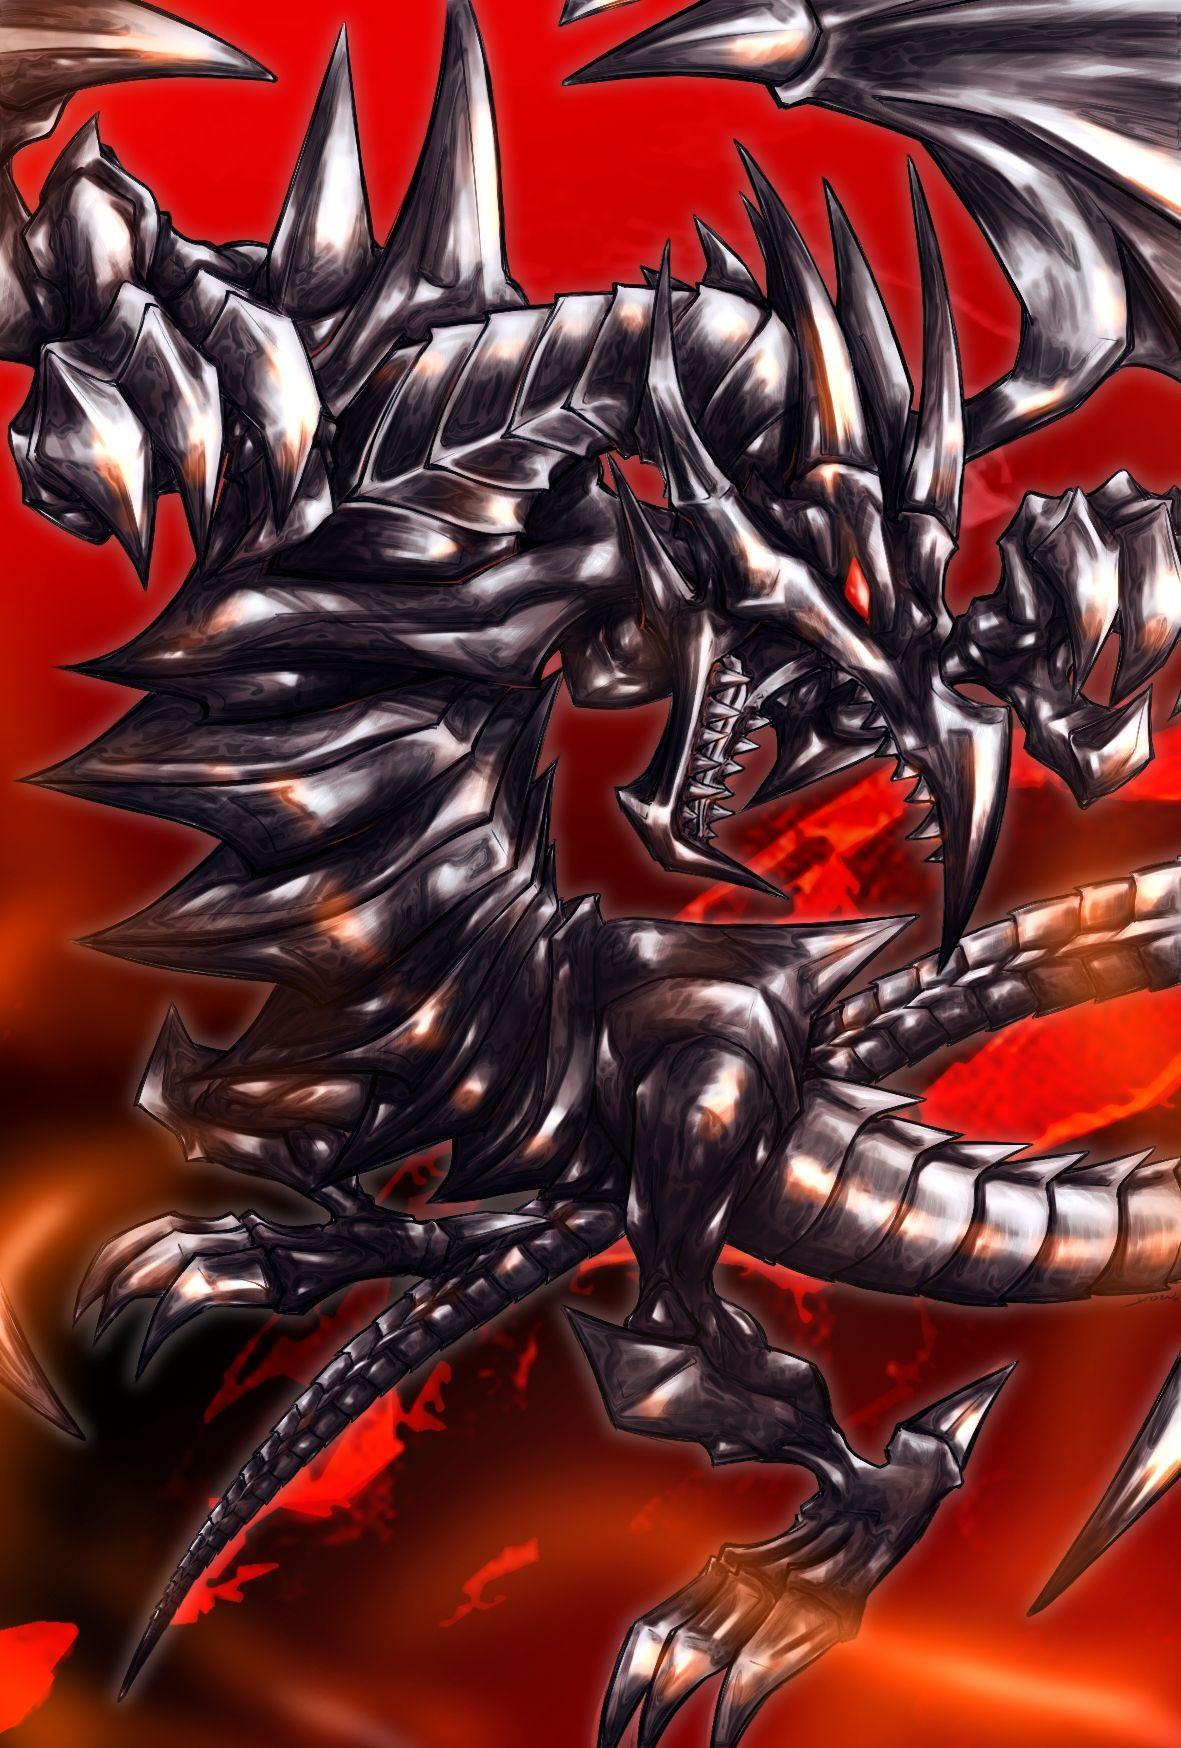 Red Eyes Darkness Metal Dragon Wallpapers - Wallpaper Cave